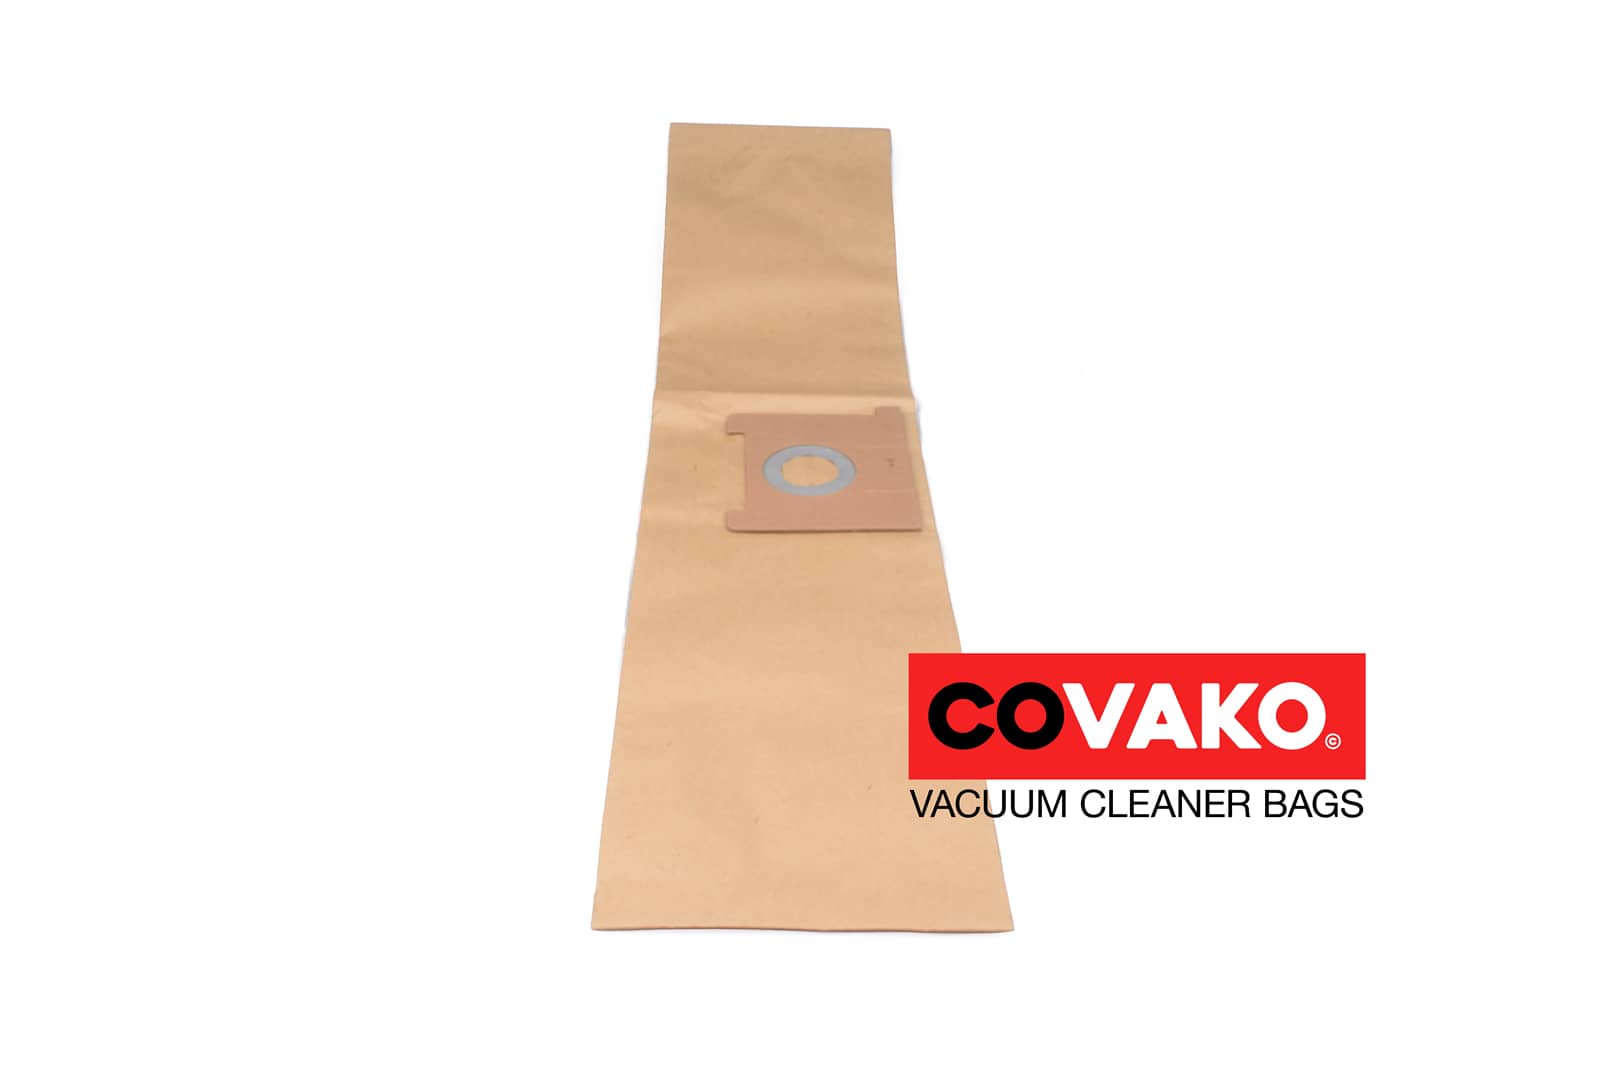 Oehme Otto 9 B / Paper - Oehme Otto vacuum cleaner bags